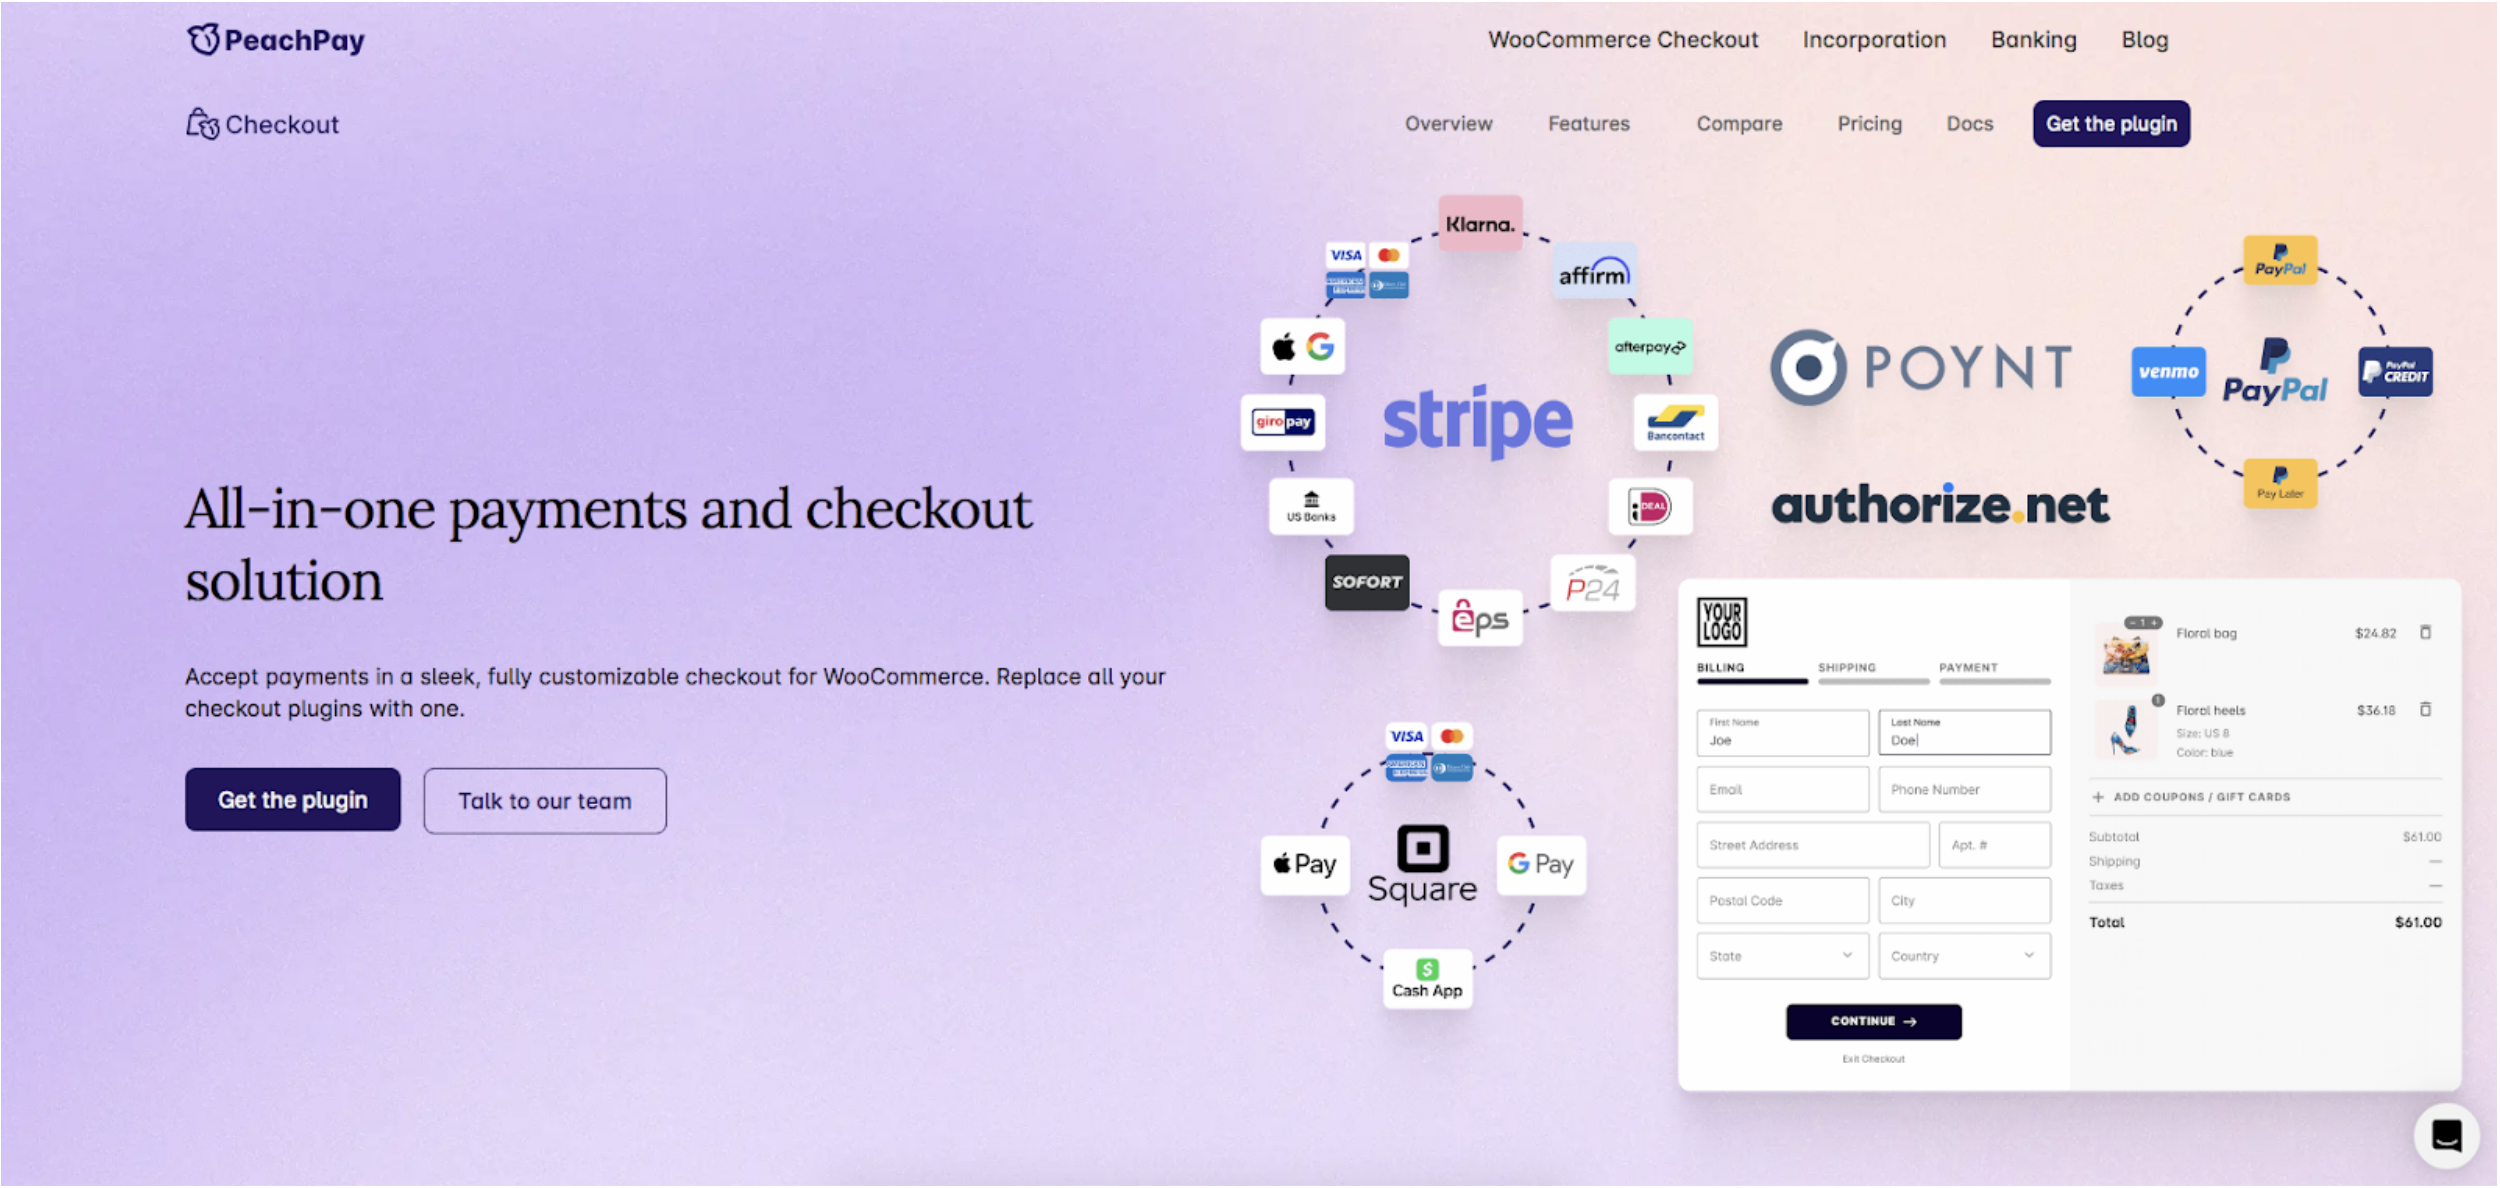 PeachPay Checkout homepage